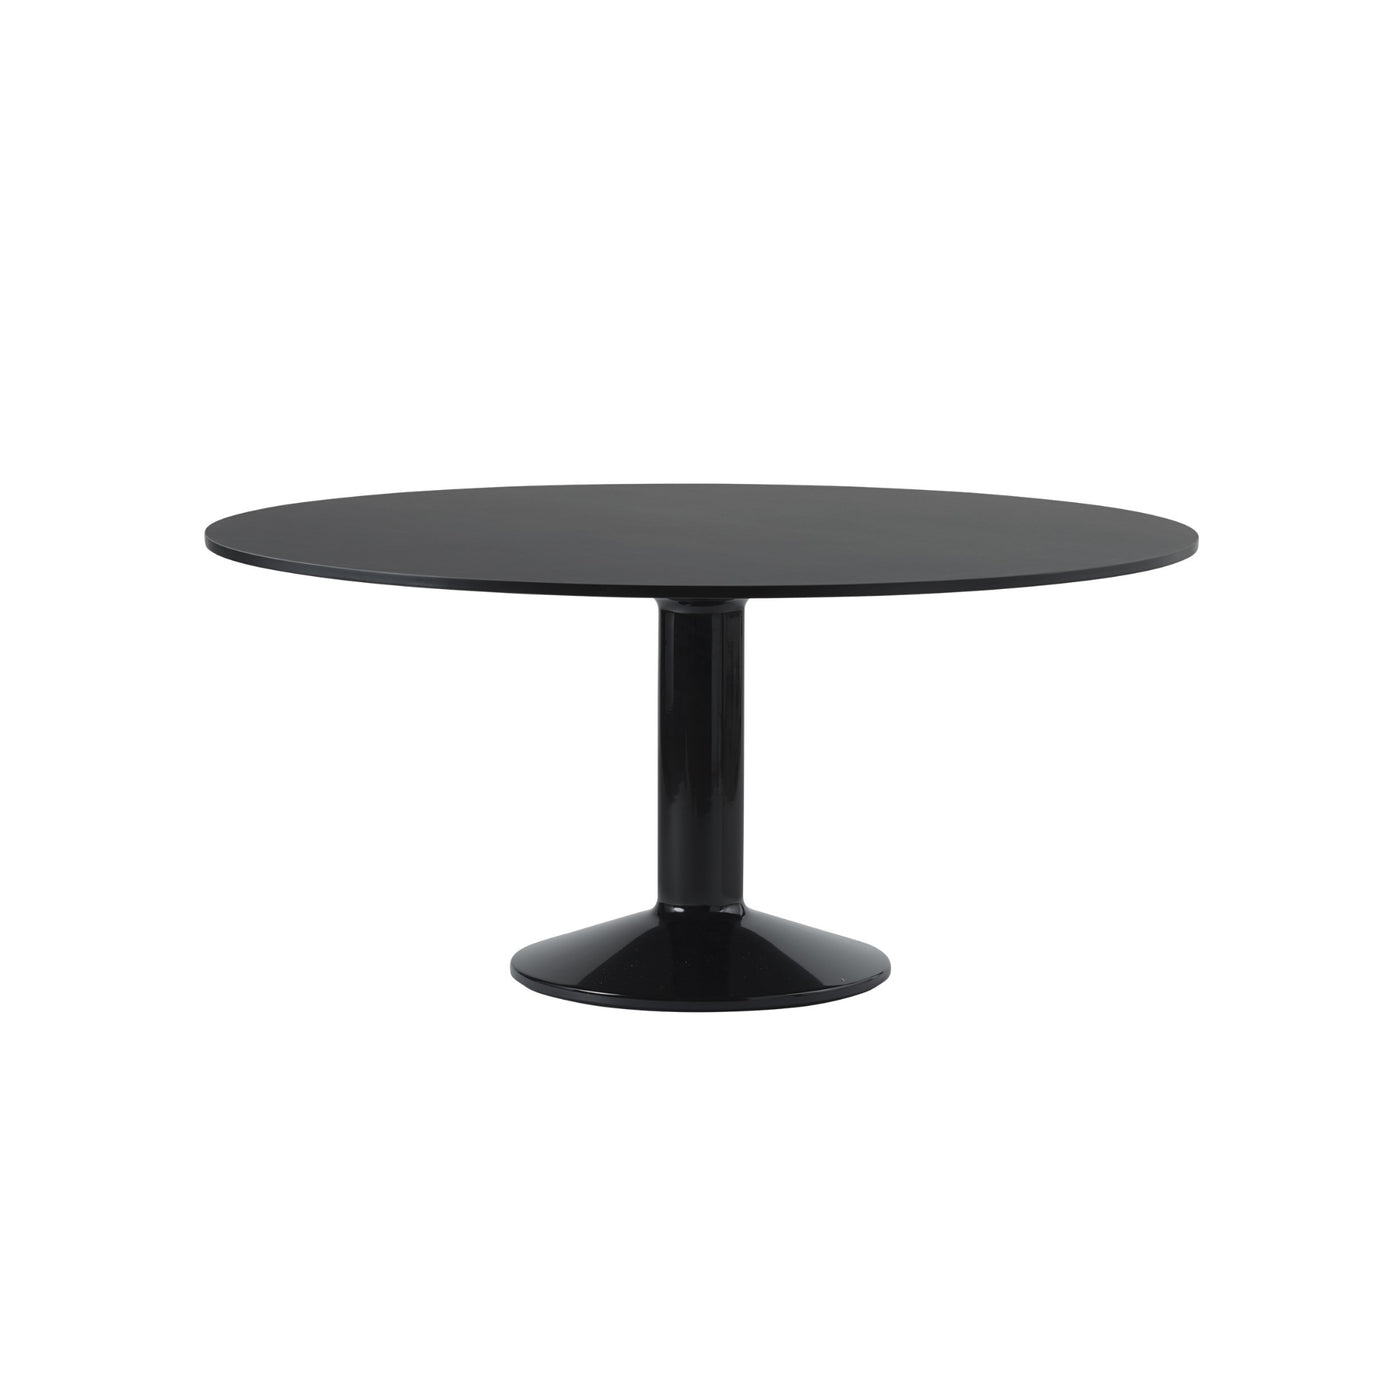 Muuto Midst dining table. Free UK delivery from someday designs. #colour_black